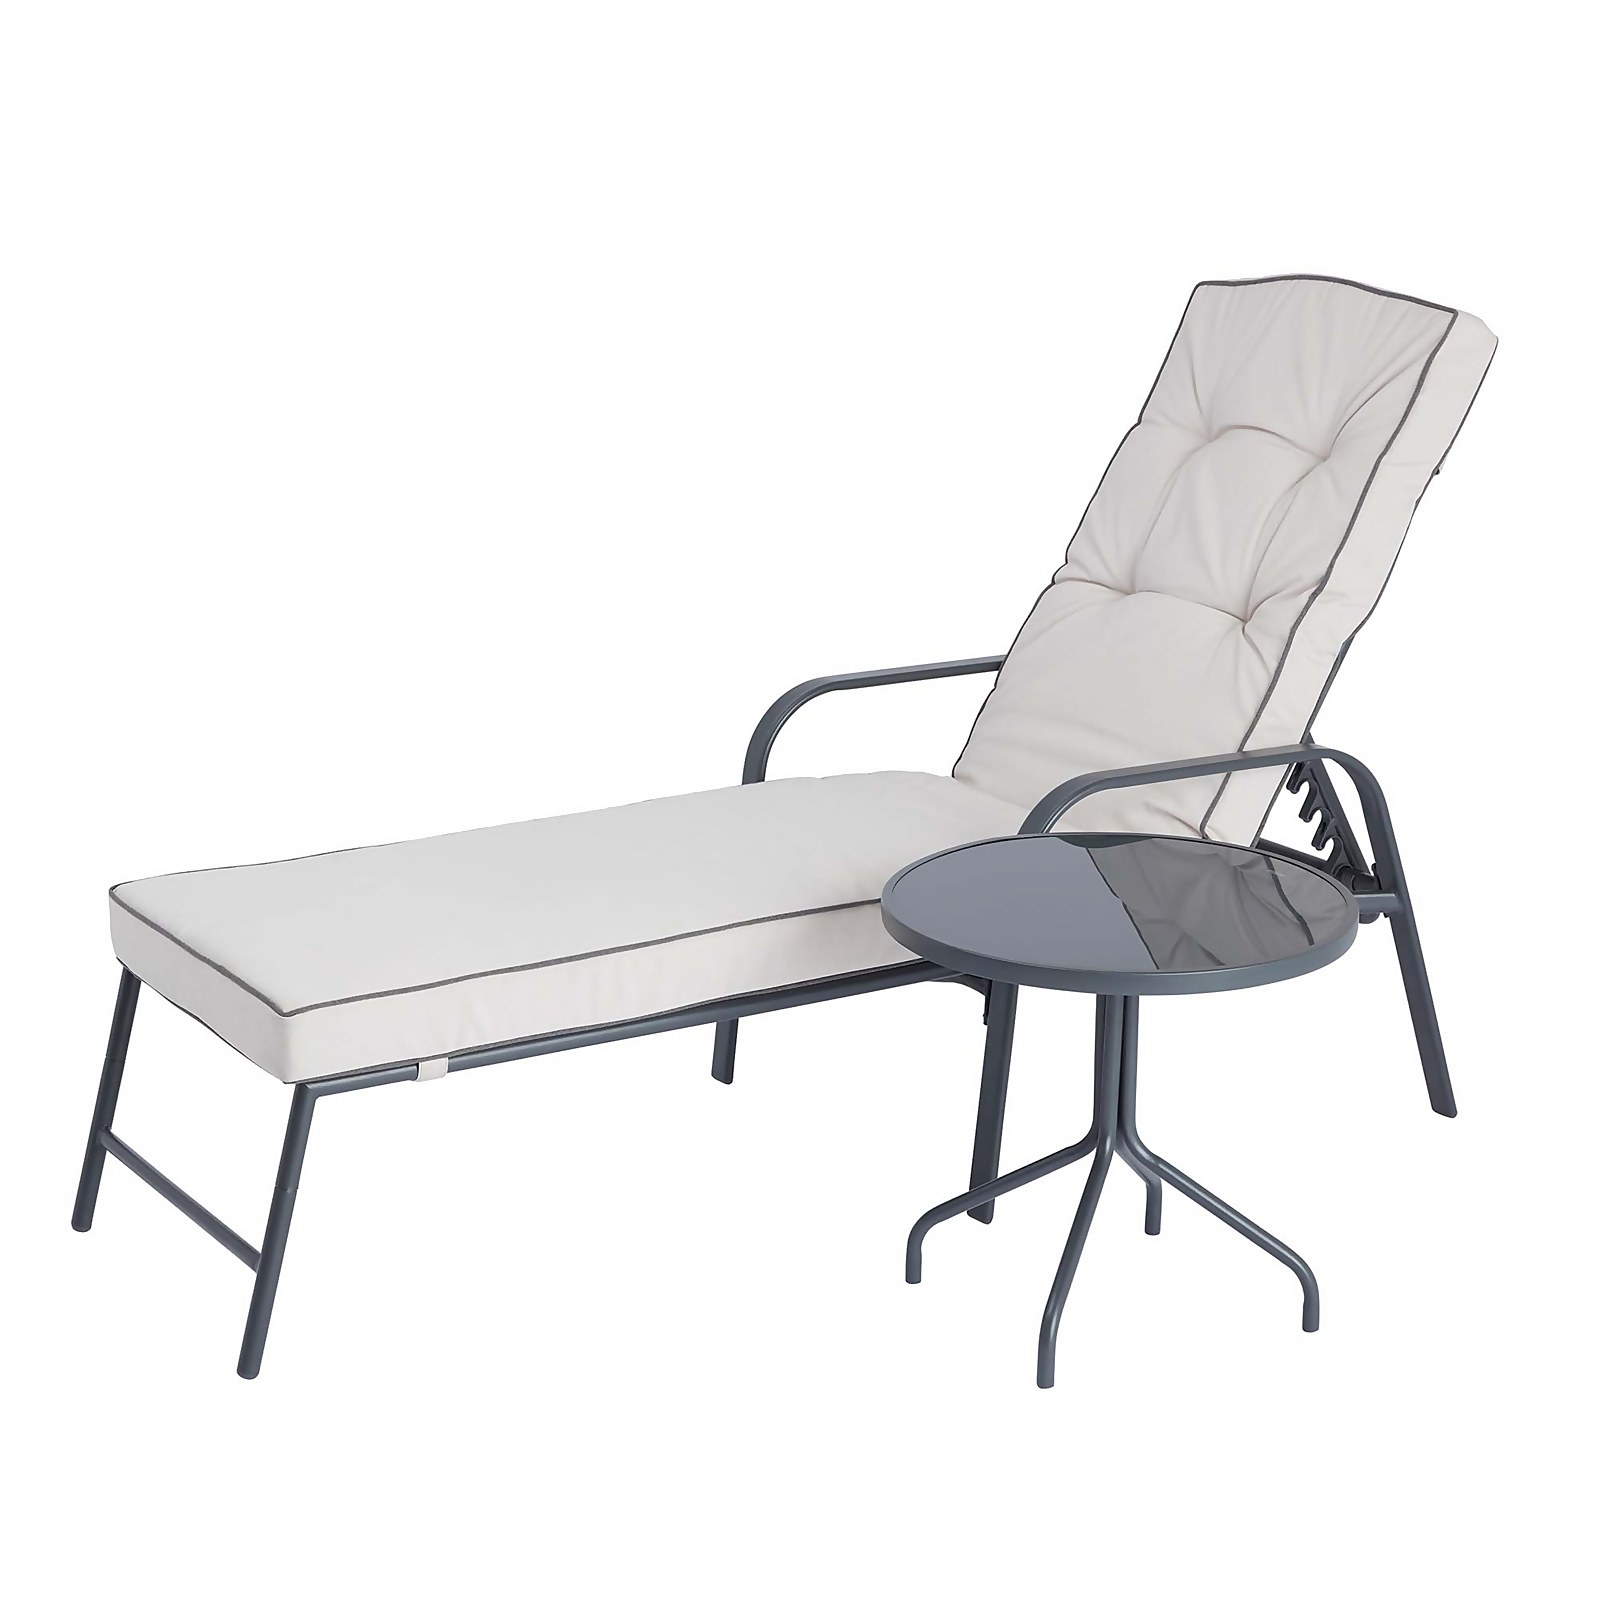 Photo of Rowly Sunlounger & Side Table